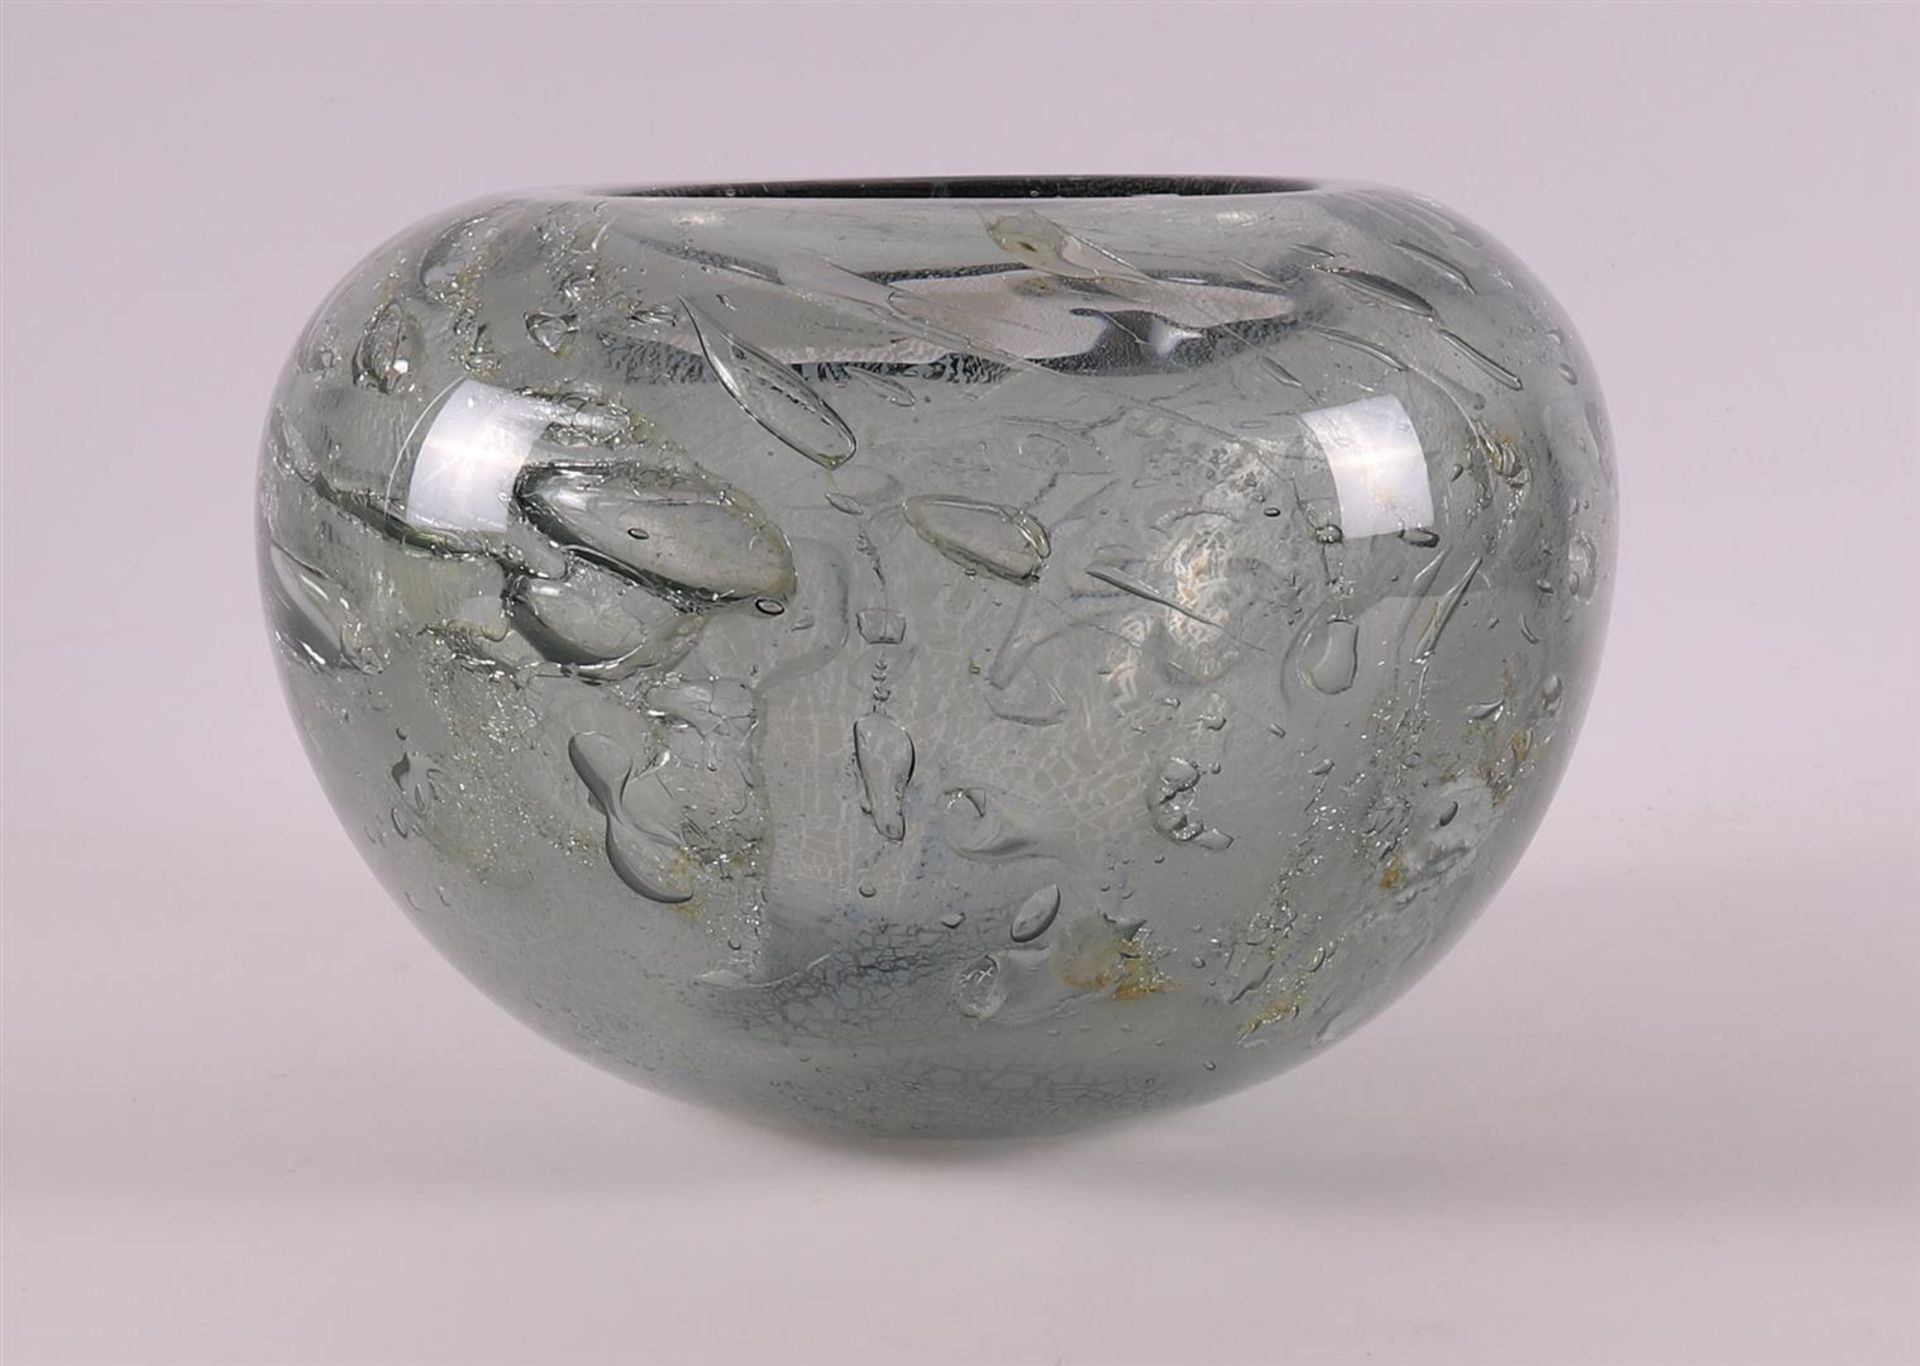 A thick-walled clear glass unica vase with enclosed air bubbles, A.D. Copier. - Image 2 of 4